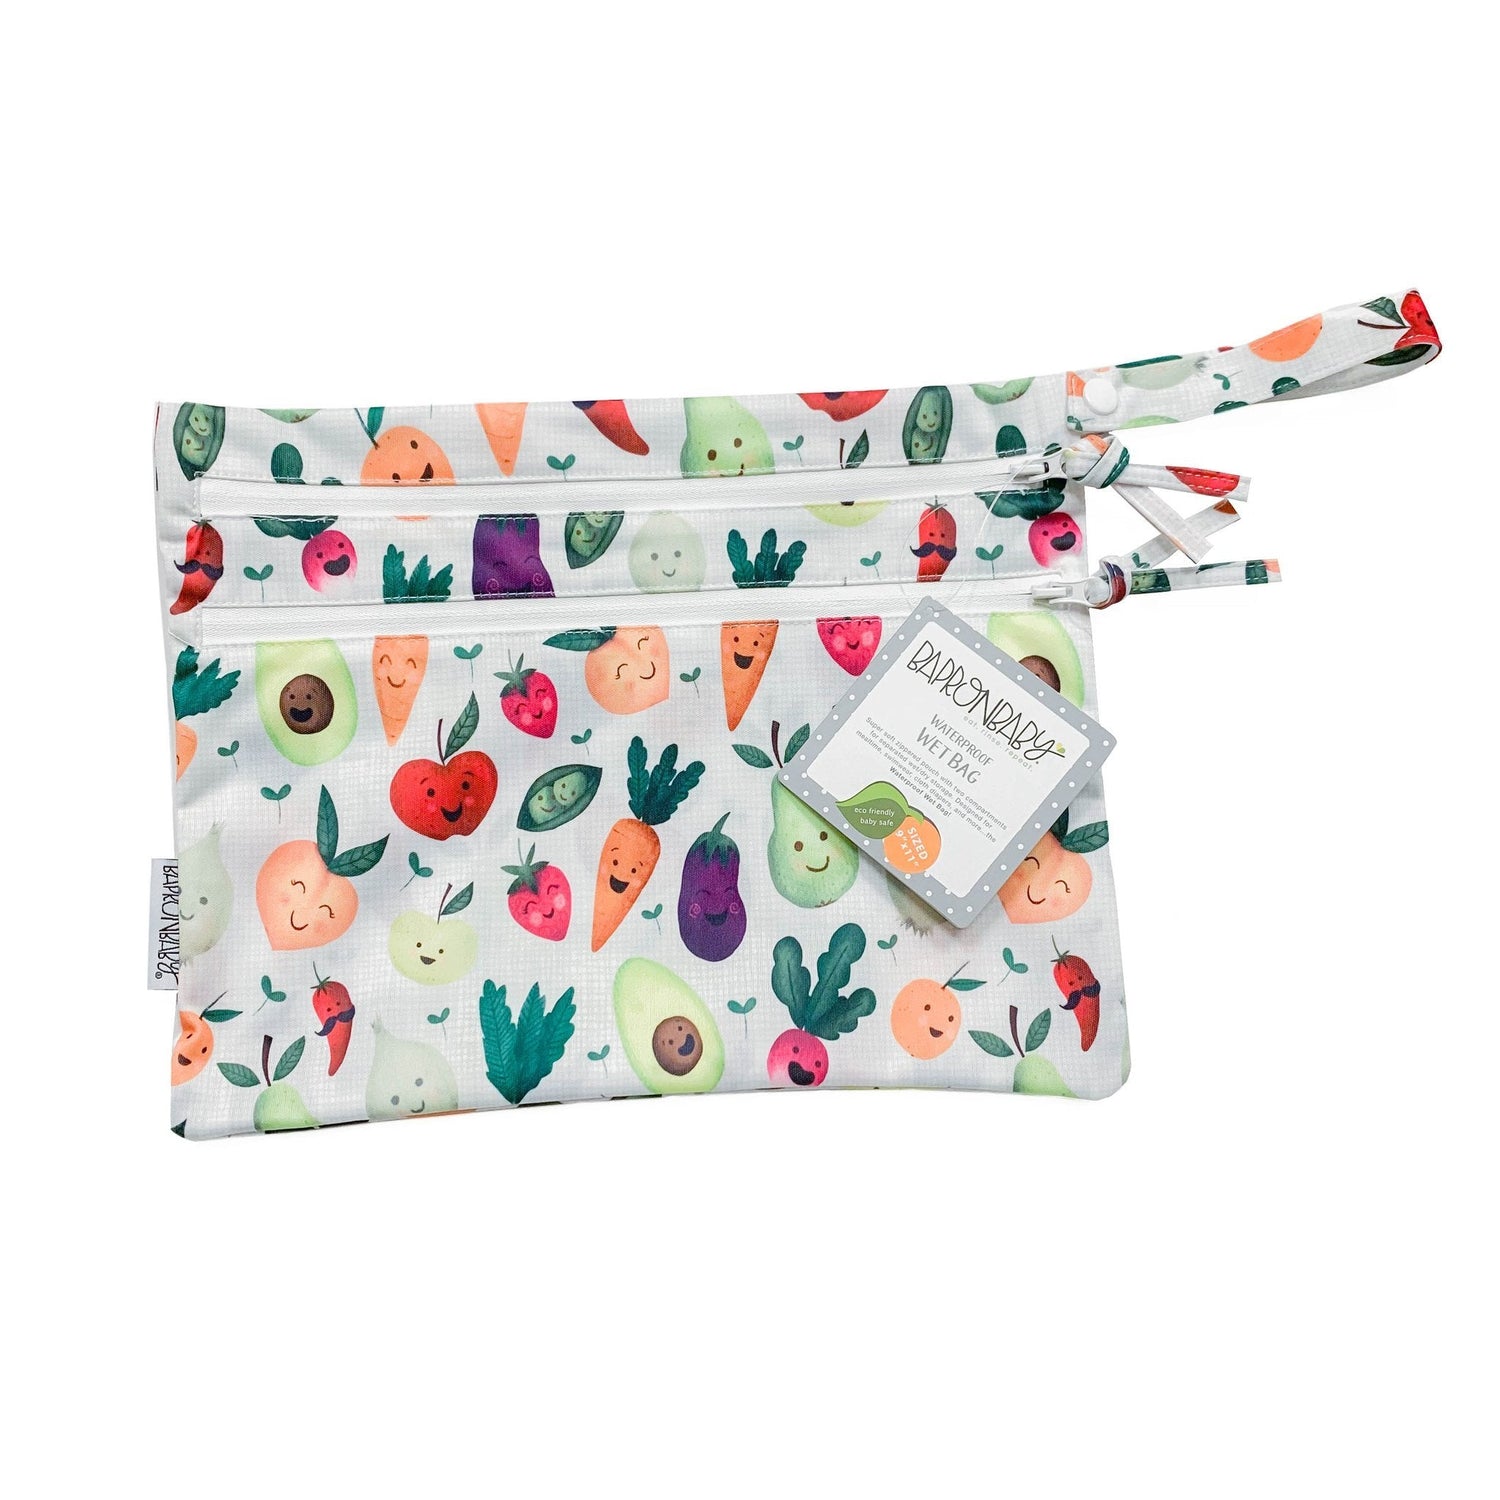 Market Fresh Produce - Waterproof Wet Bag (For mealtime, on-the-go, and more!) - WERONE